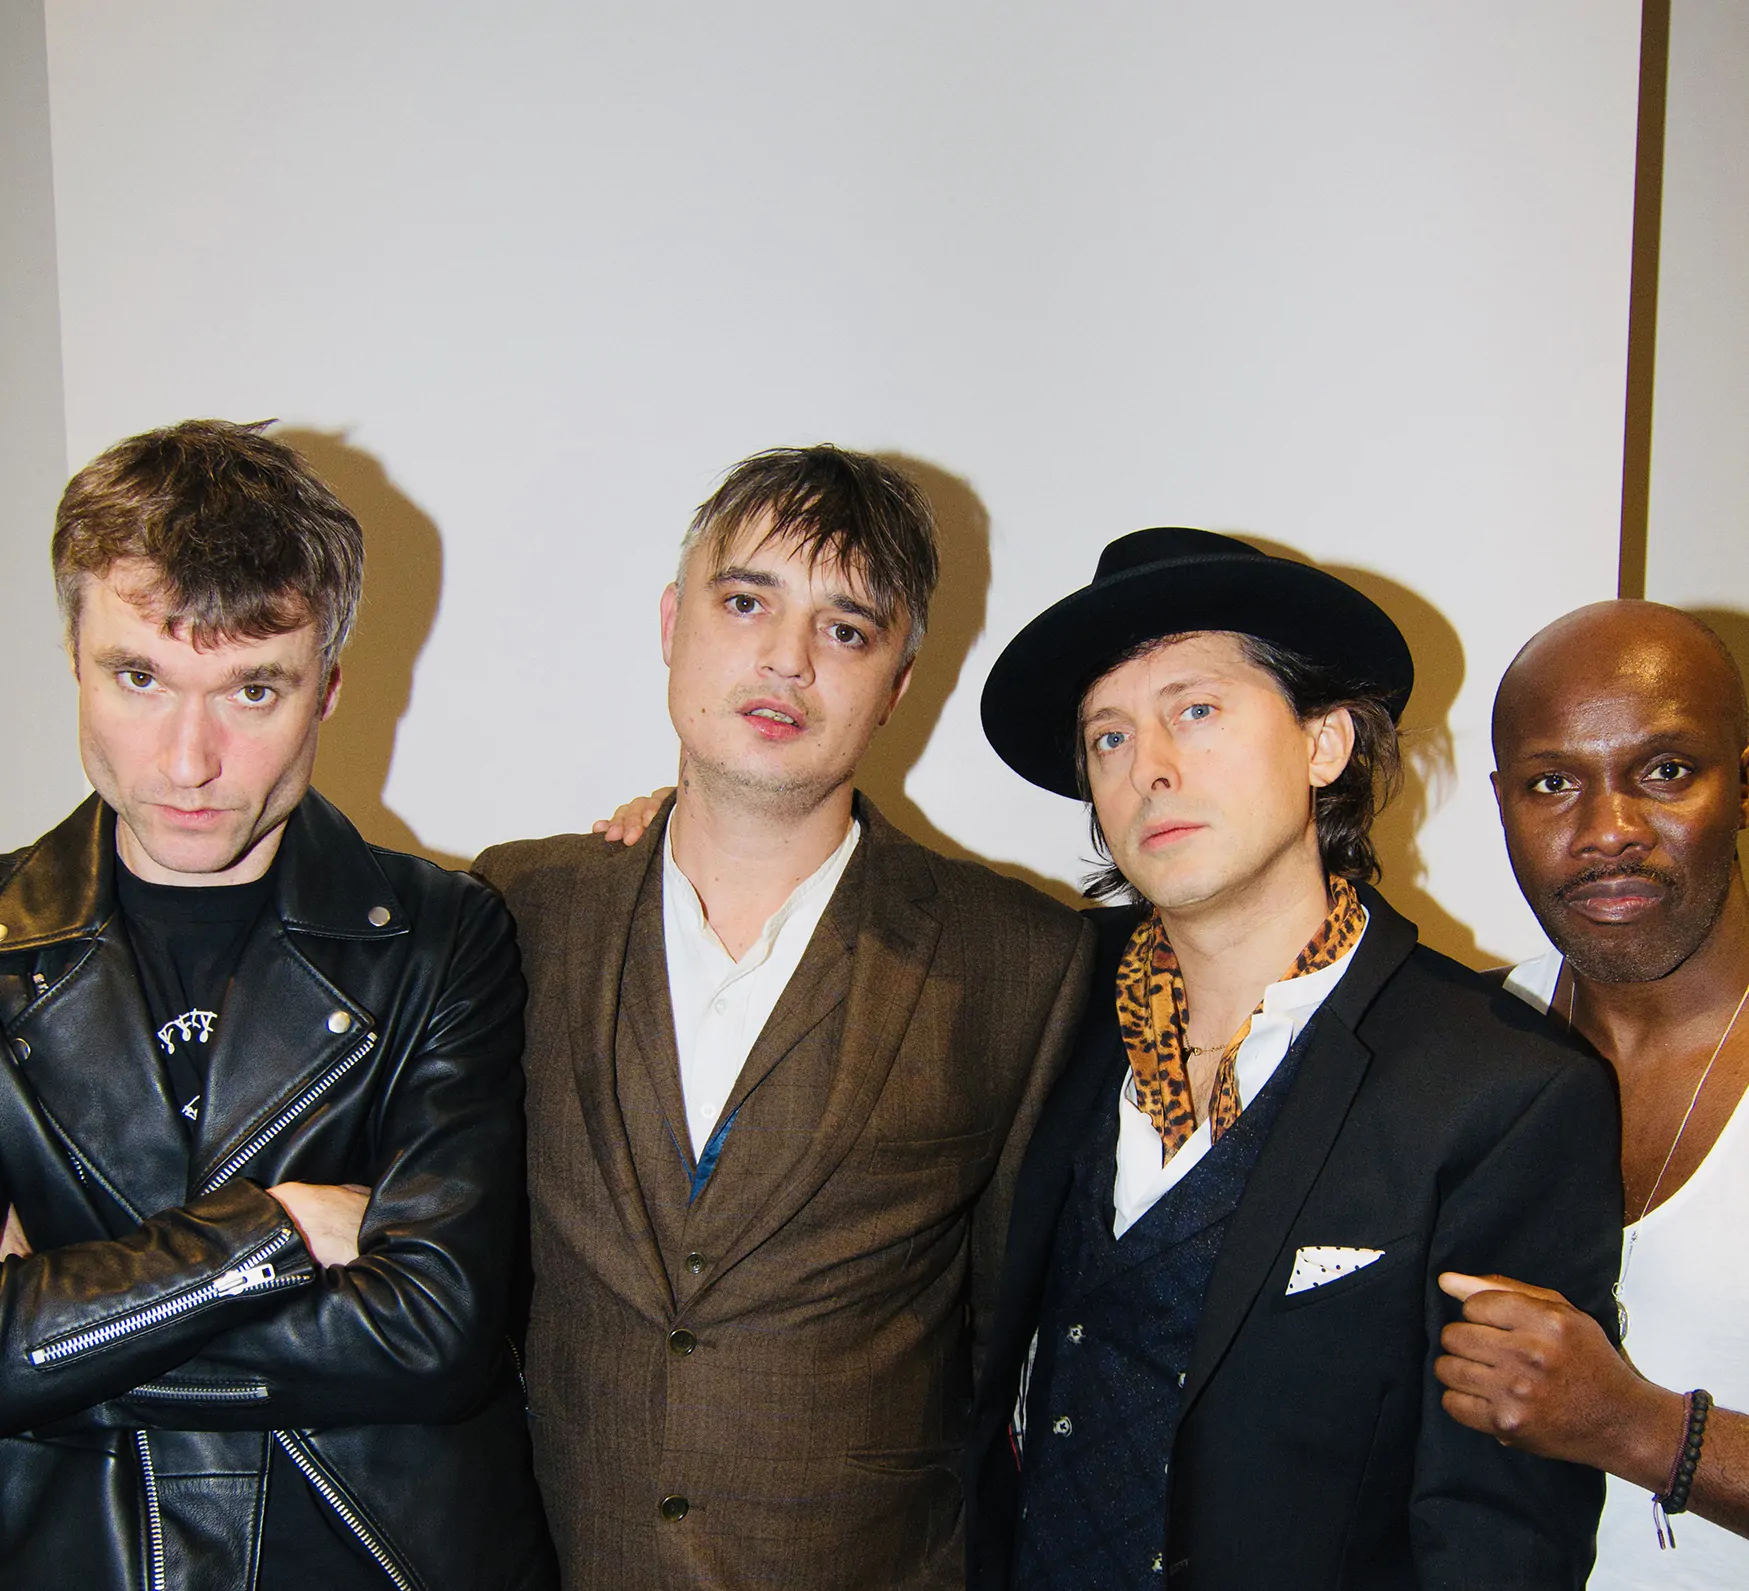 THE LIBERTINES announce a fifteen-date Christmas jaunt across the UK in November and December